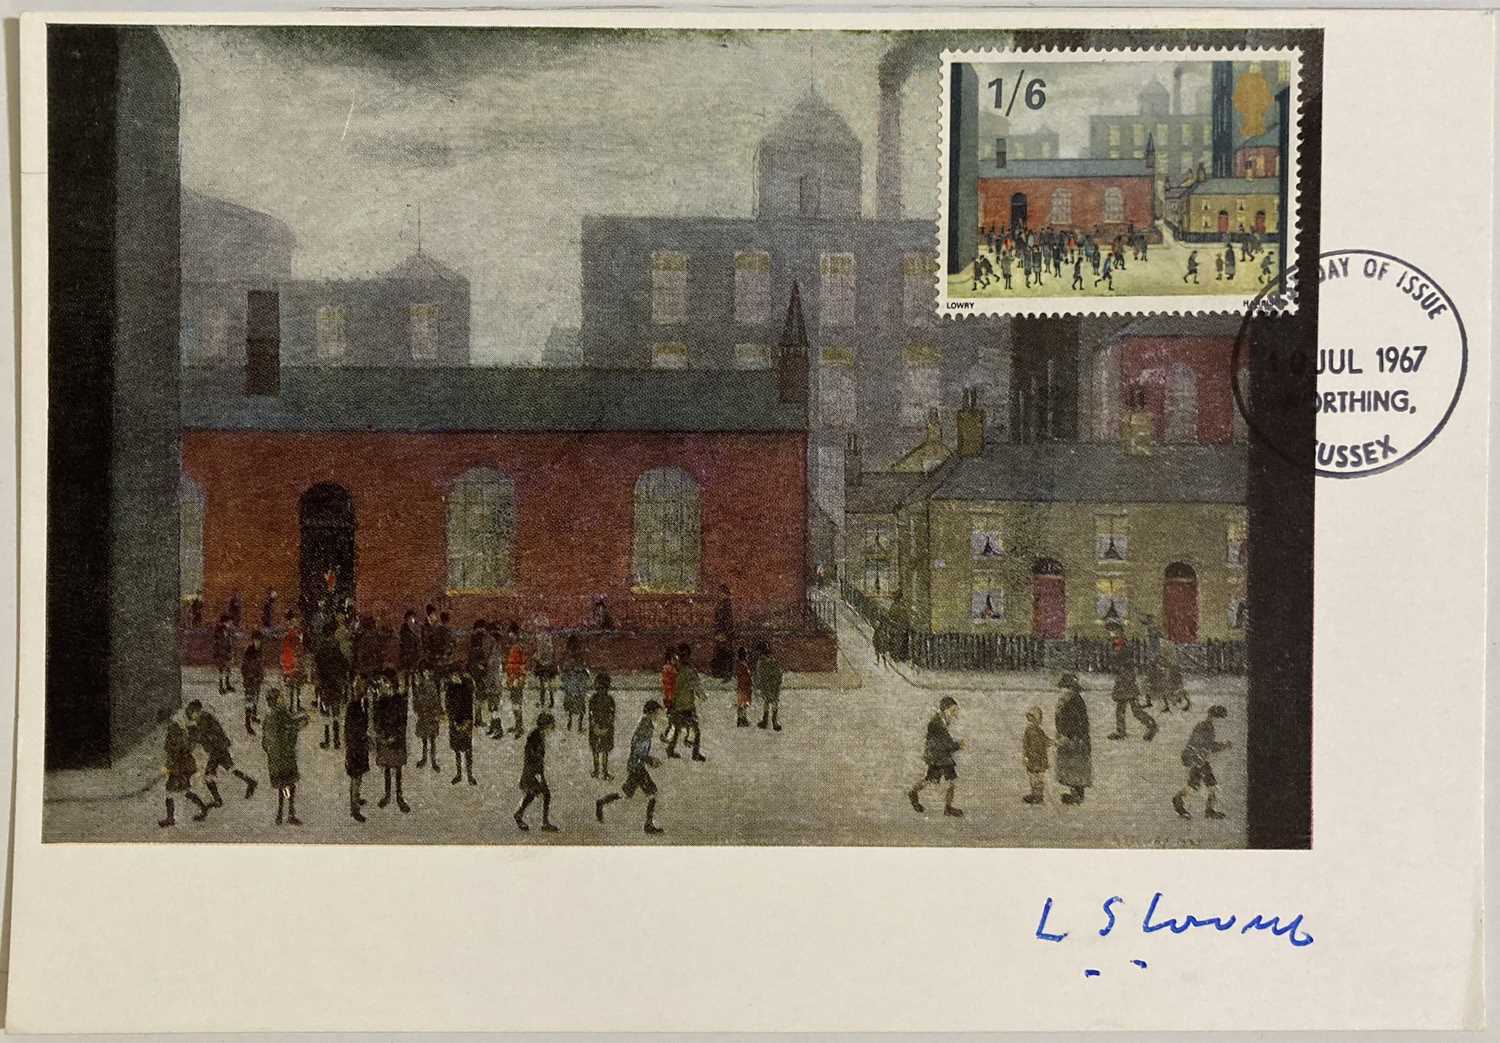 Lot 1 - L.S. LOWRY (1887-1976) ARTIST SIGNED POSTCARD - COMING OUT OF SCHOOL